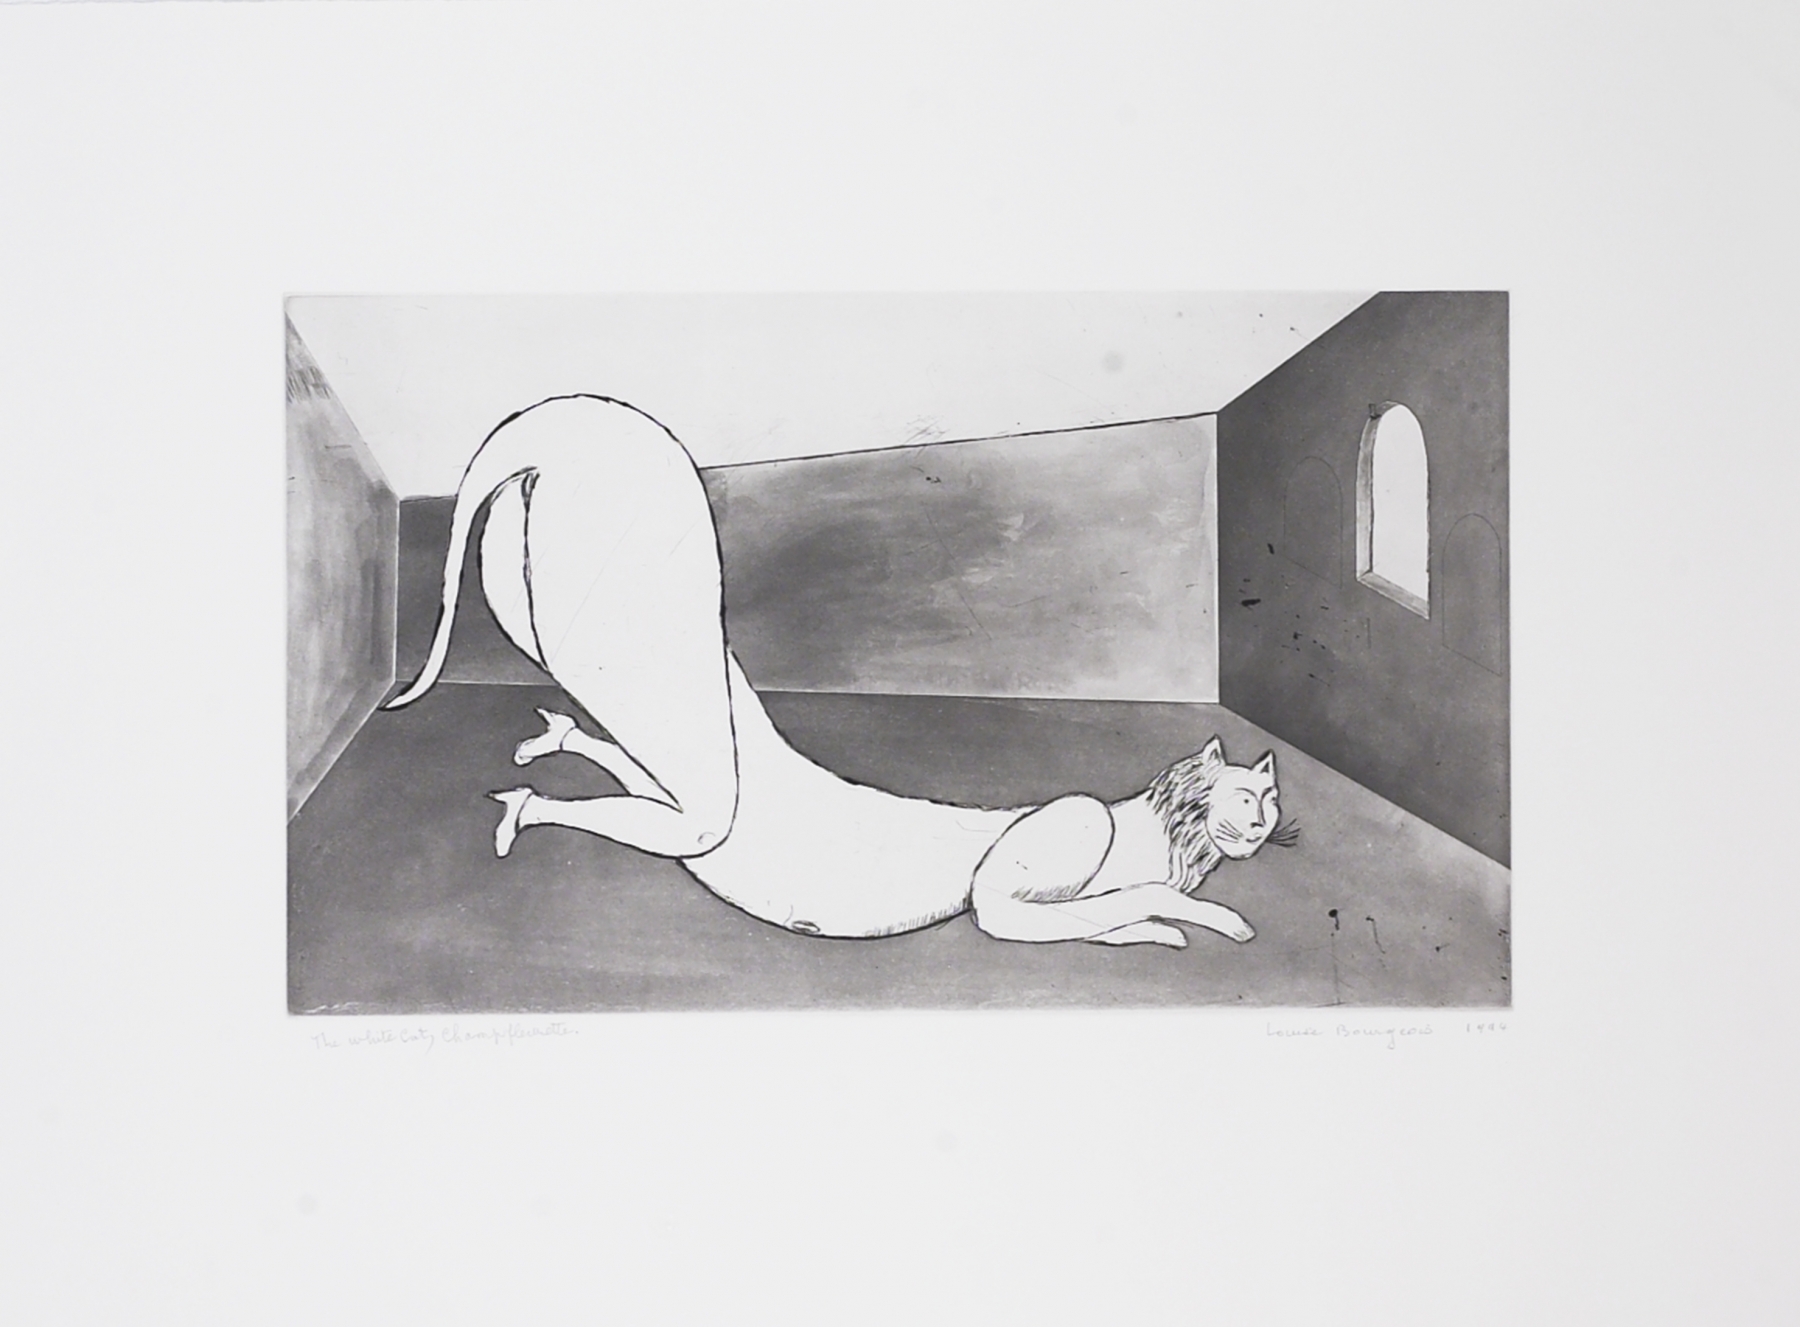 Champfleurette, the White Cat, 1994
Drypoint, etching, and aquatint
18 1/2 x 25 inches (46.99 x 63.5 cm)
Edition of 22 + proofs

Inquire
&nbsp;